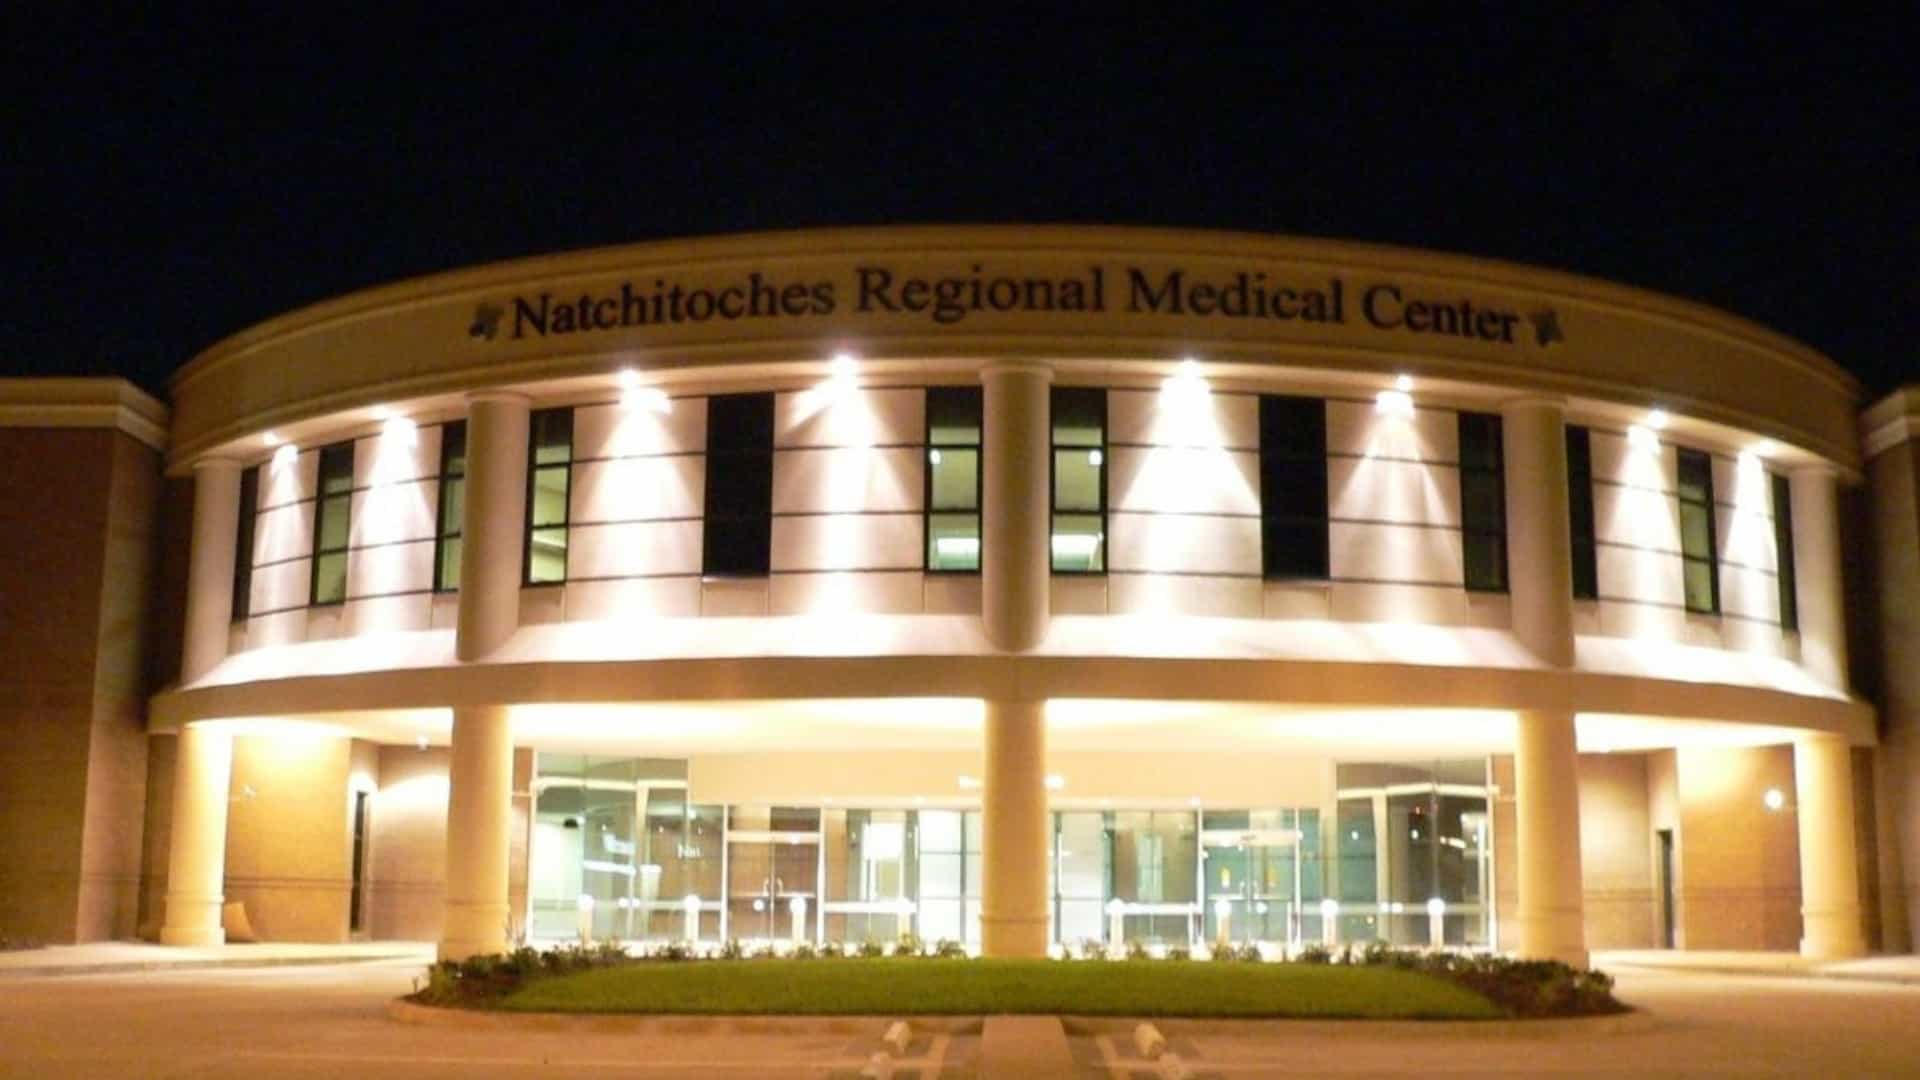 The Natchitoches Regional Medical Center